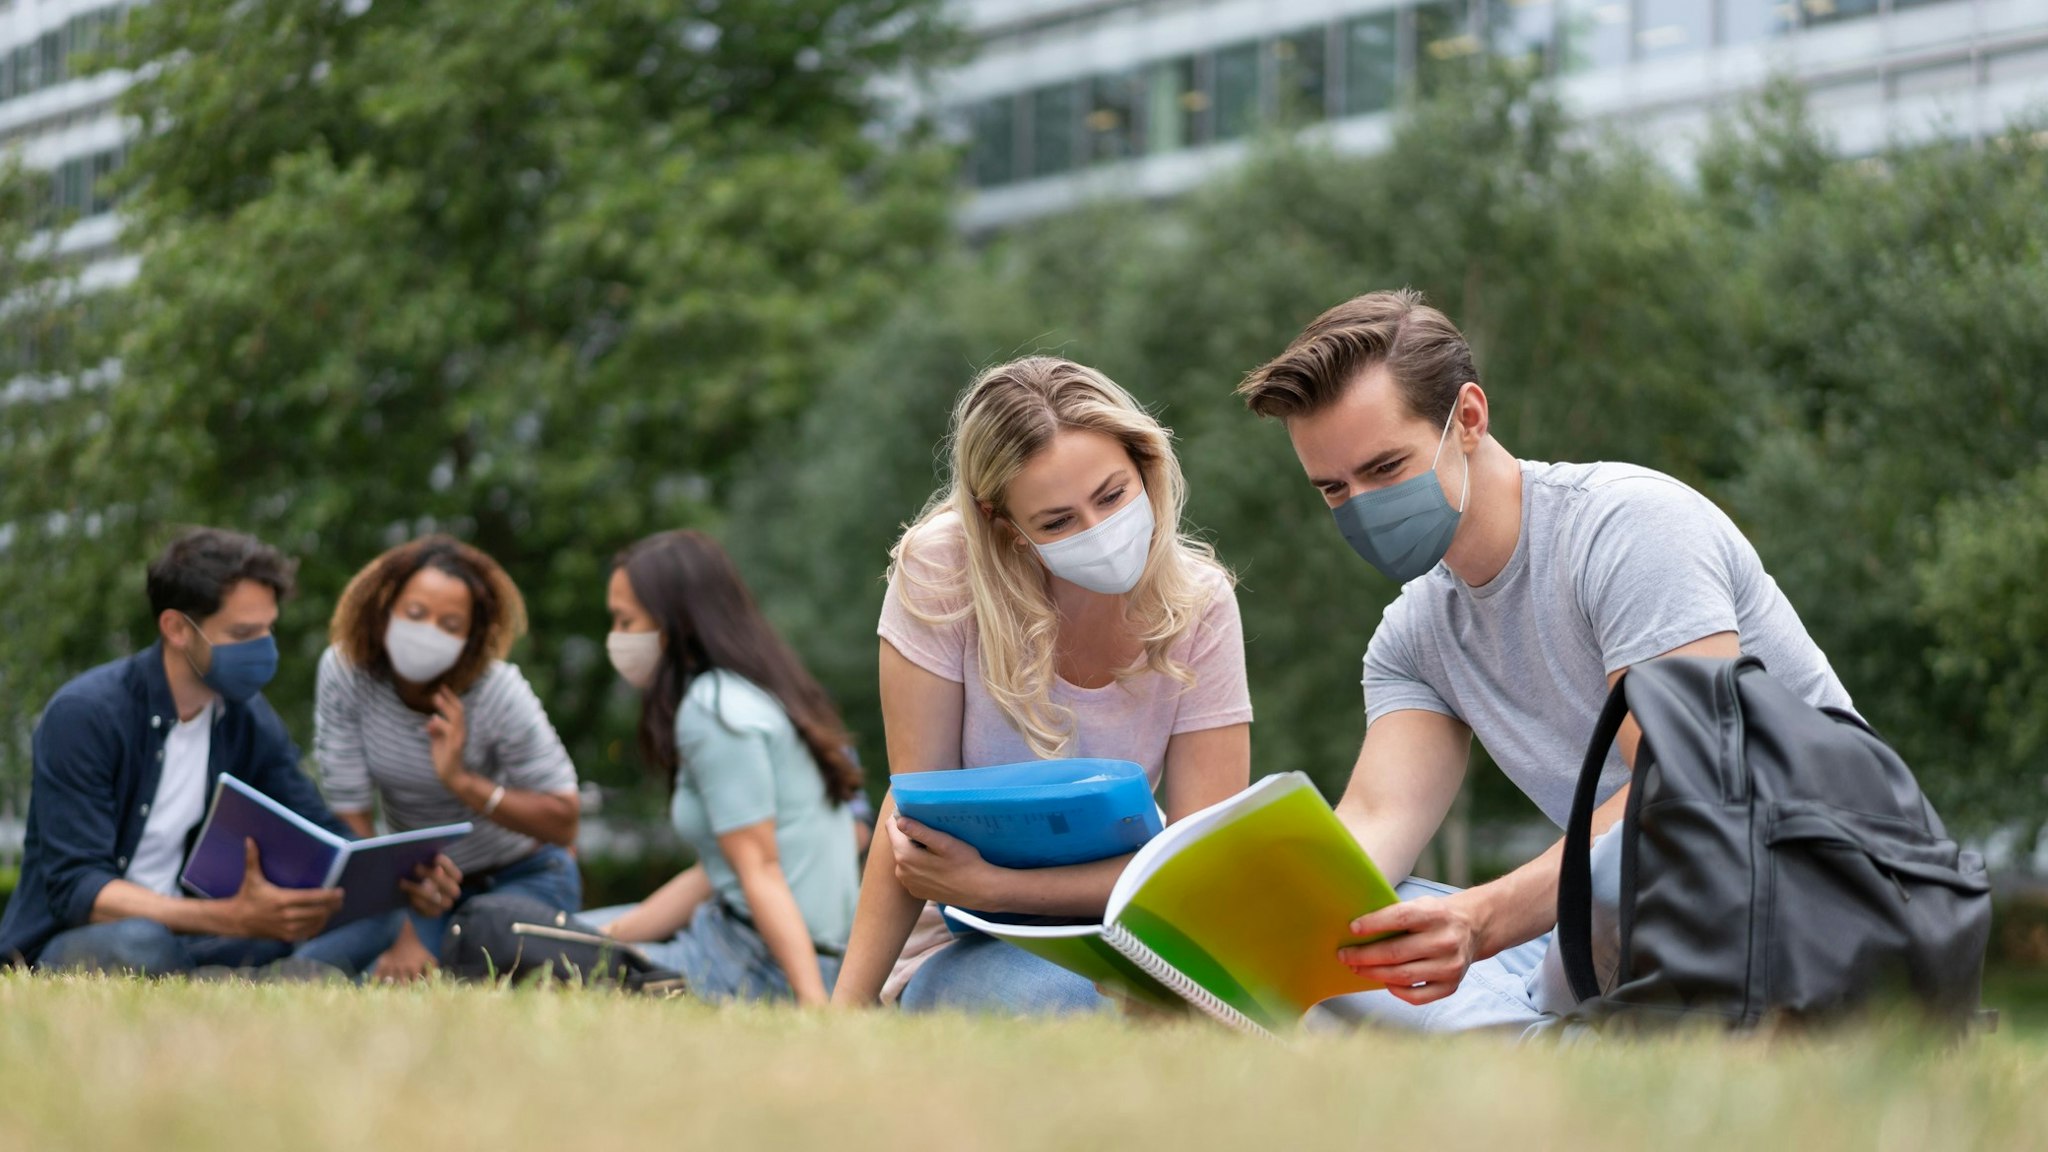 Students wearing a facemask while studying together outdoors during the COVID-19 pandemic